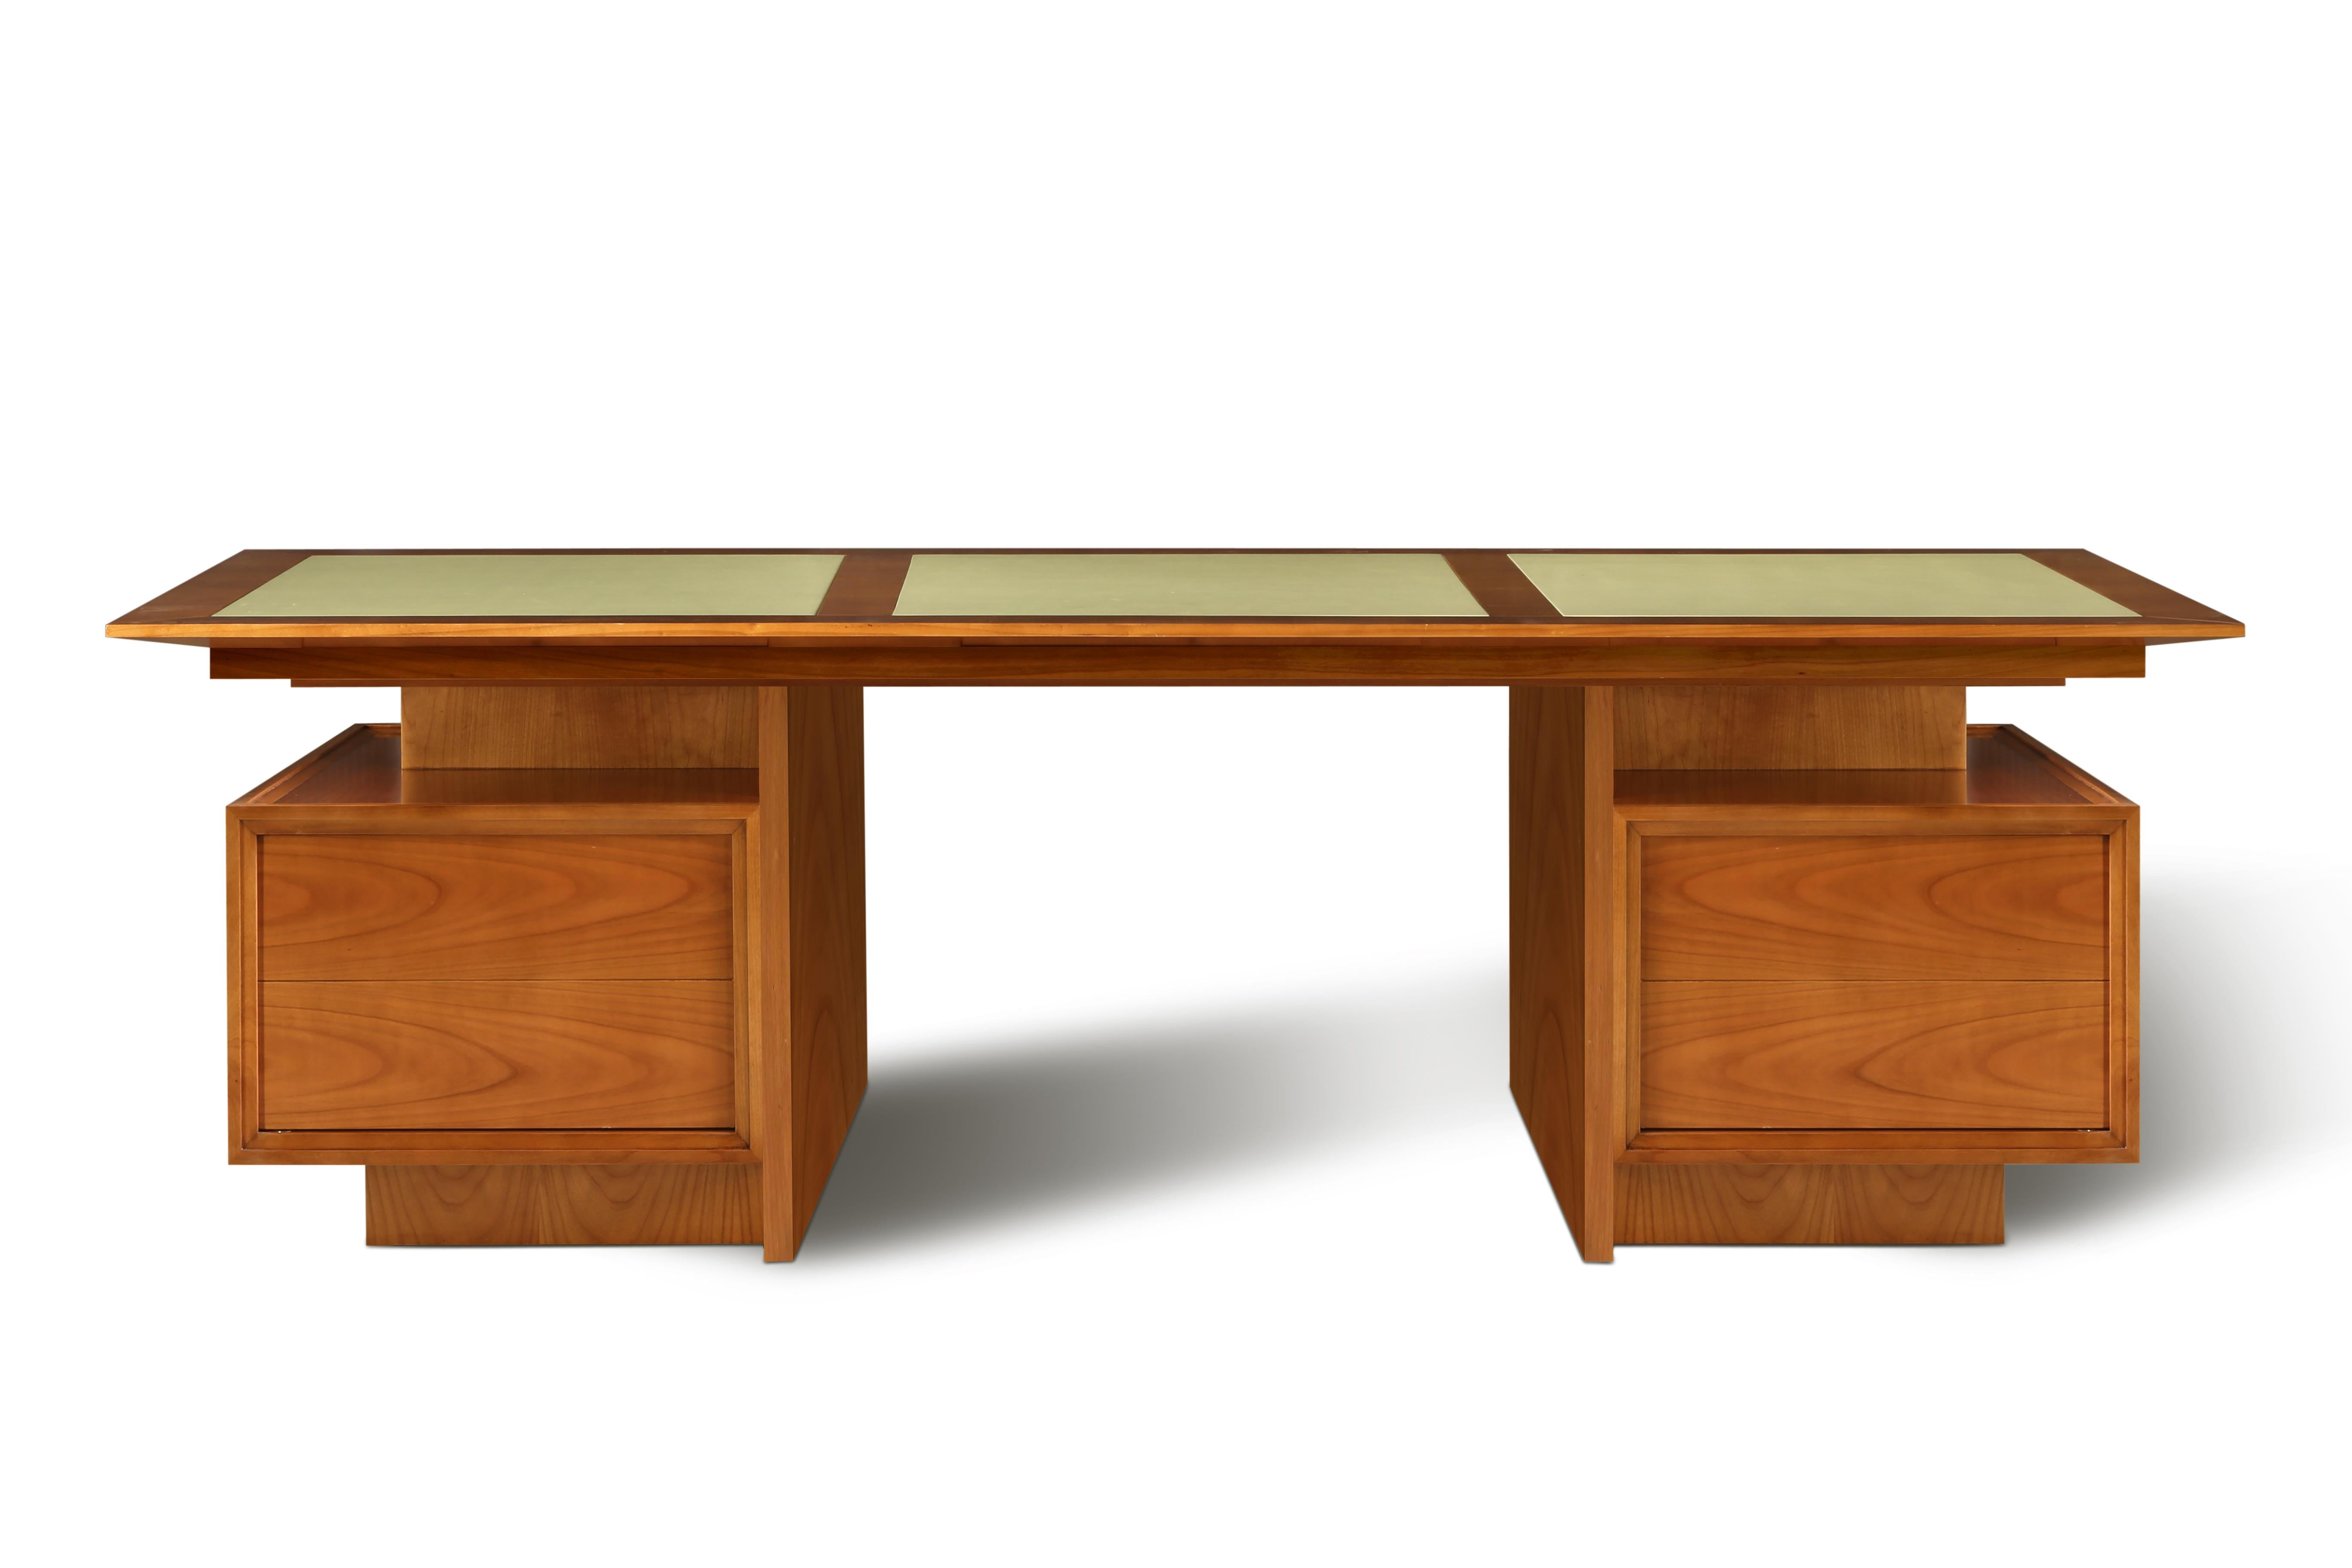 Italian Wooden Desk Made of Cherry Wood with Leather Top, President by Morelato